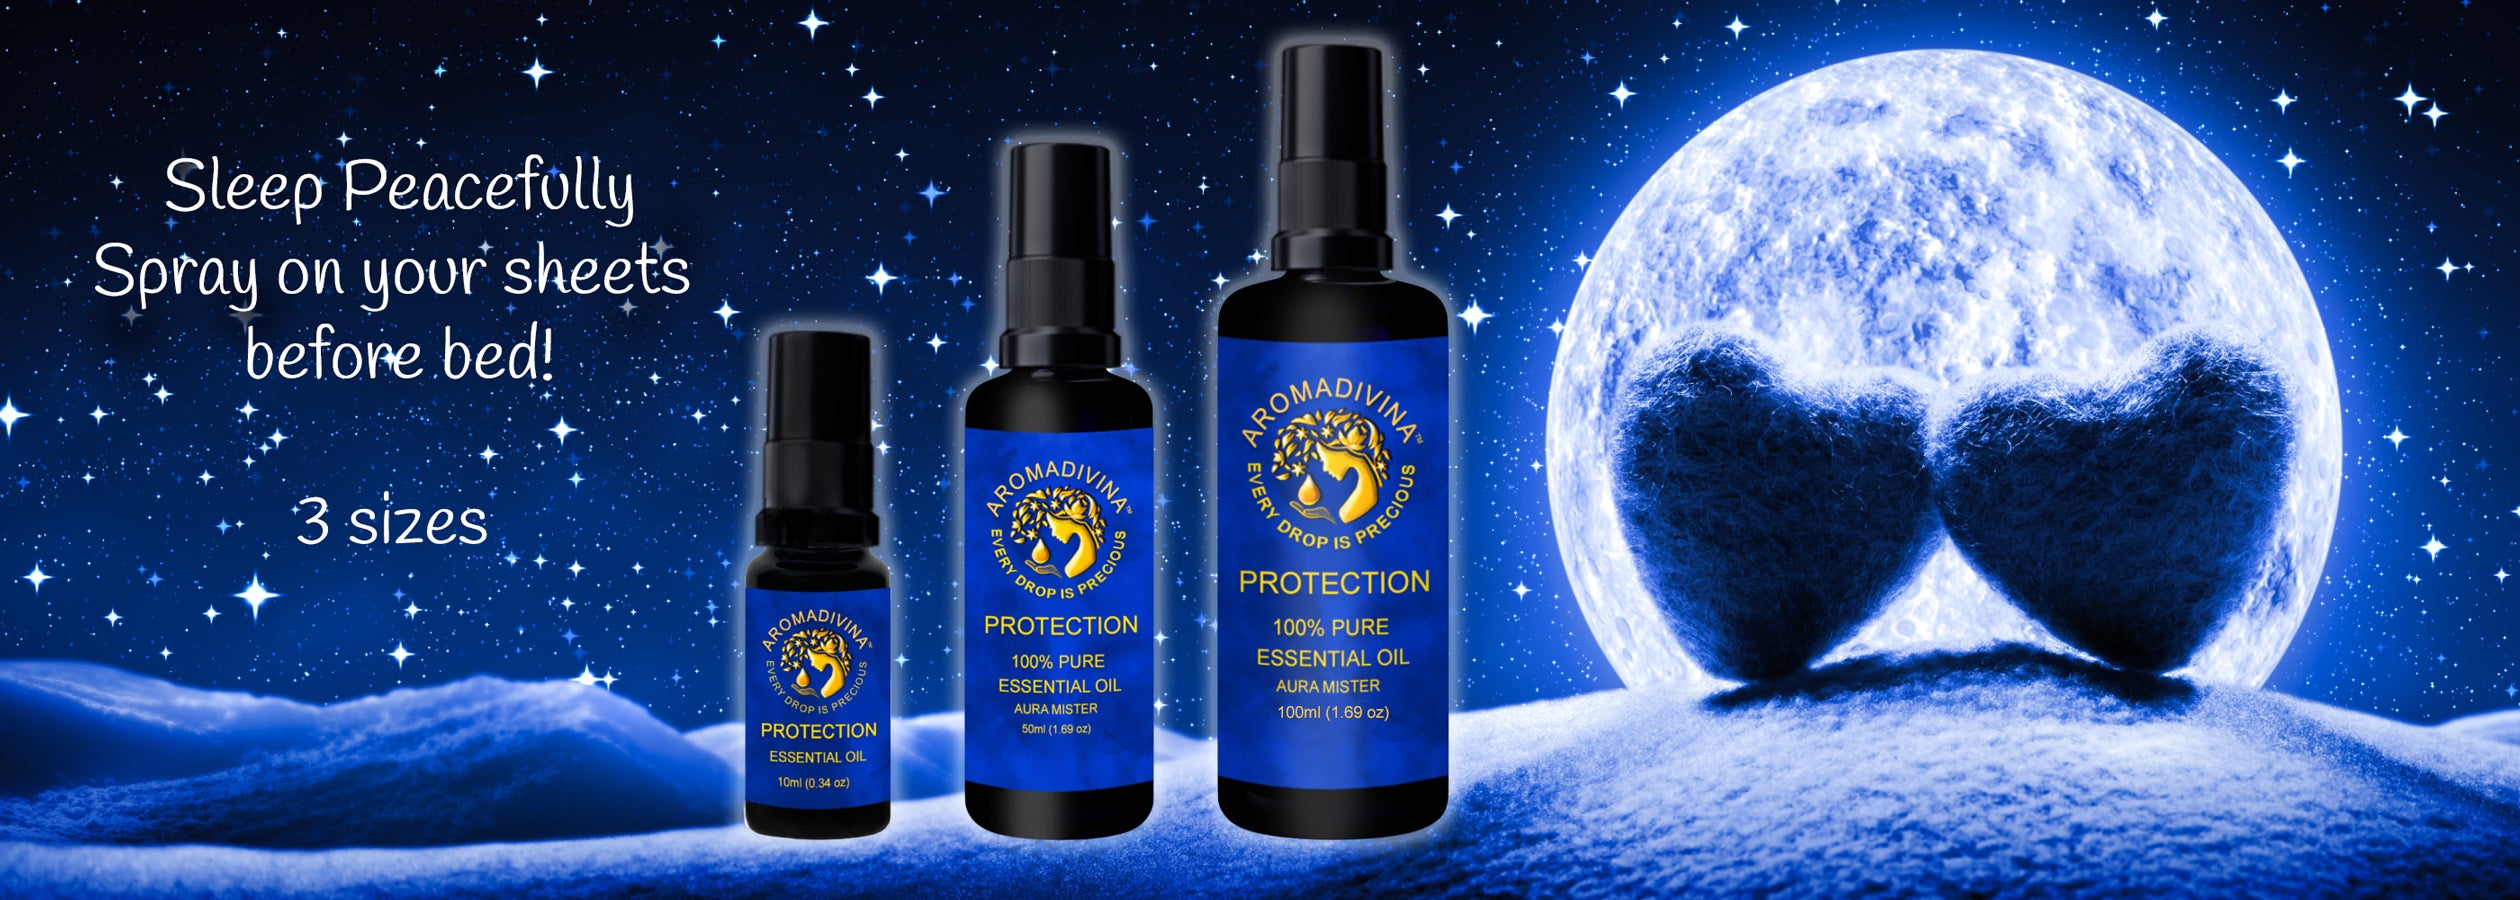 Protection-Essential-Oil